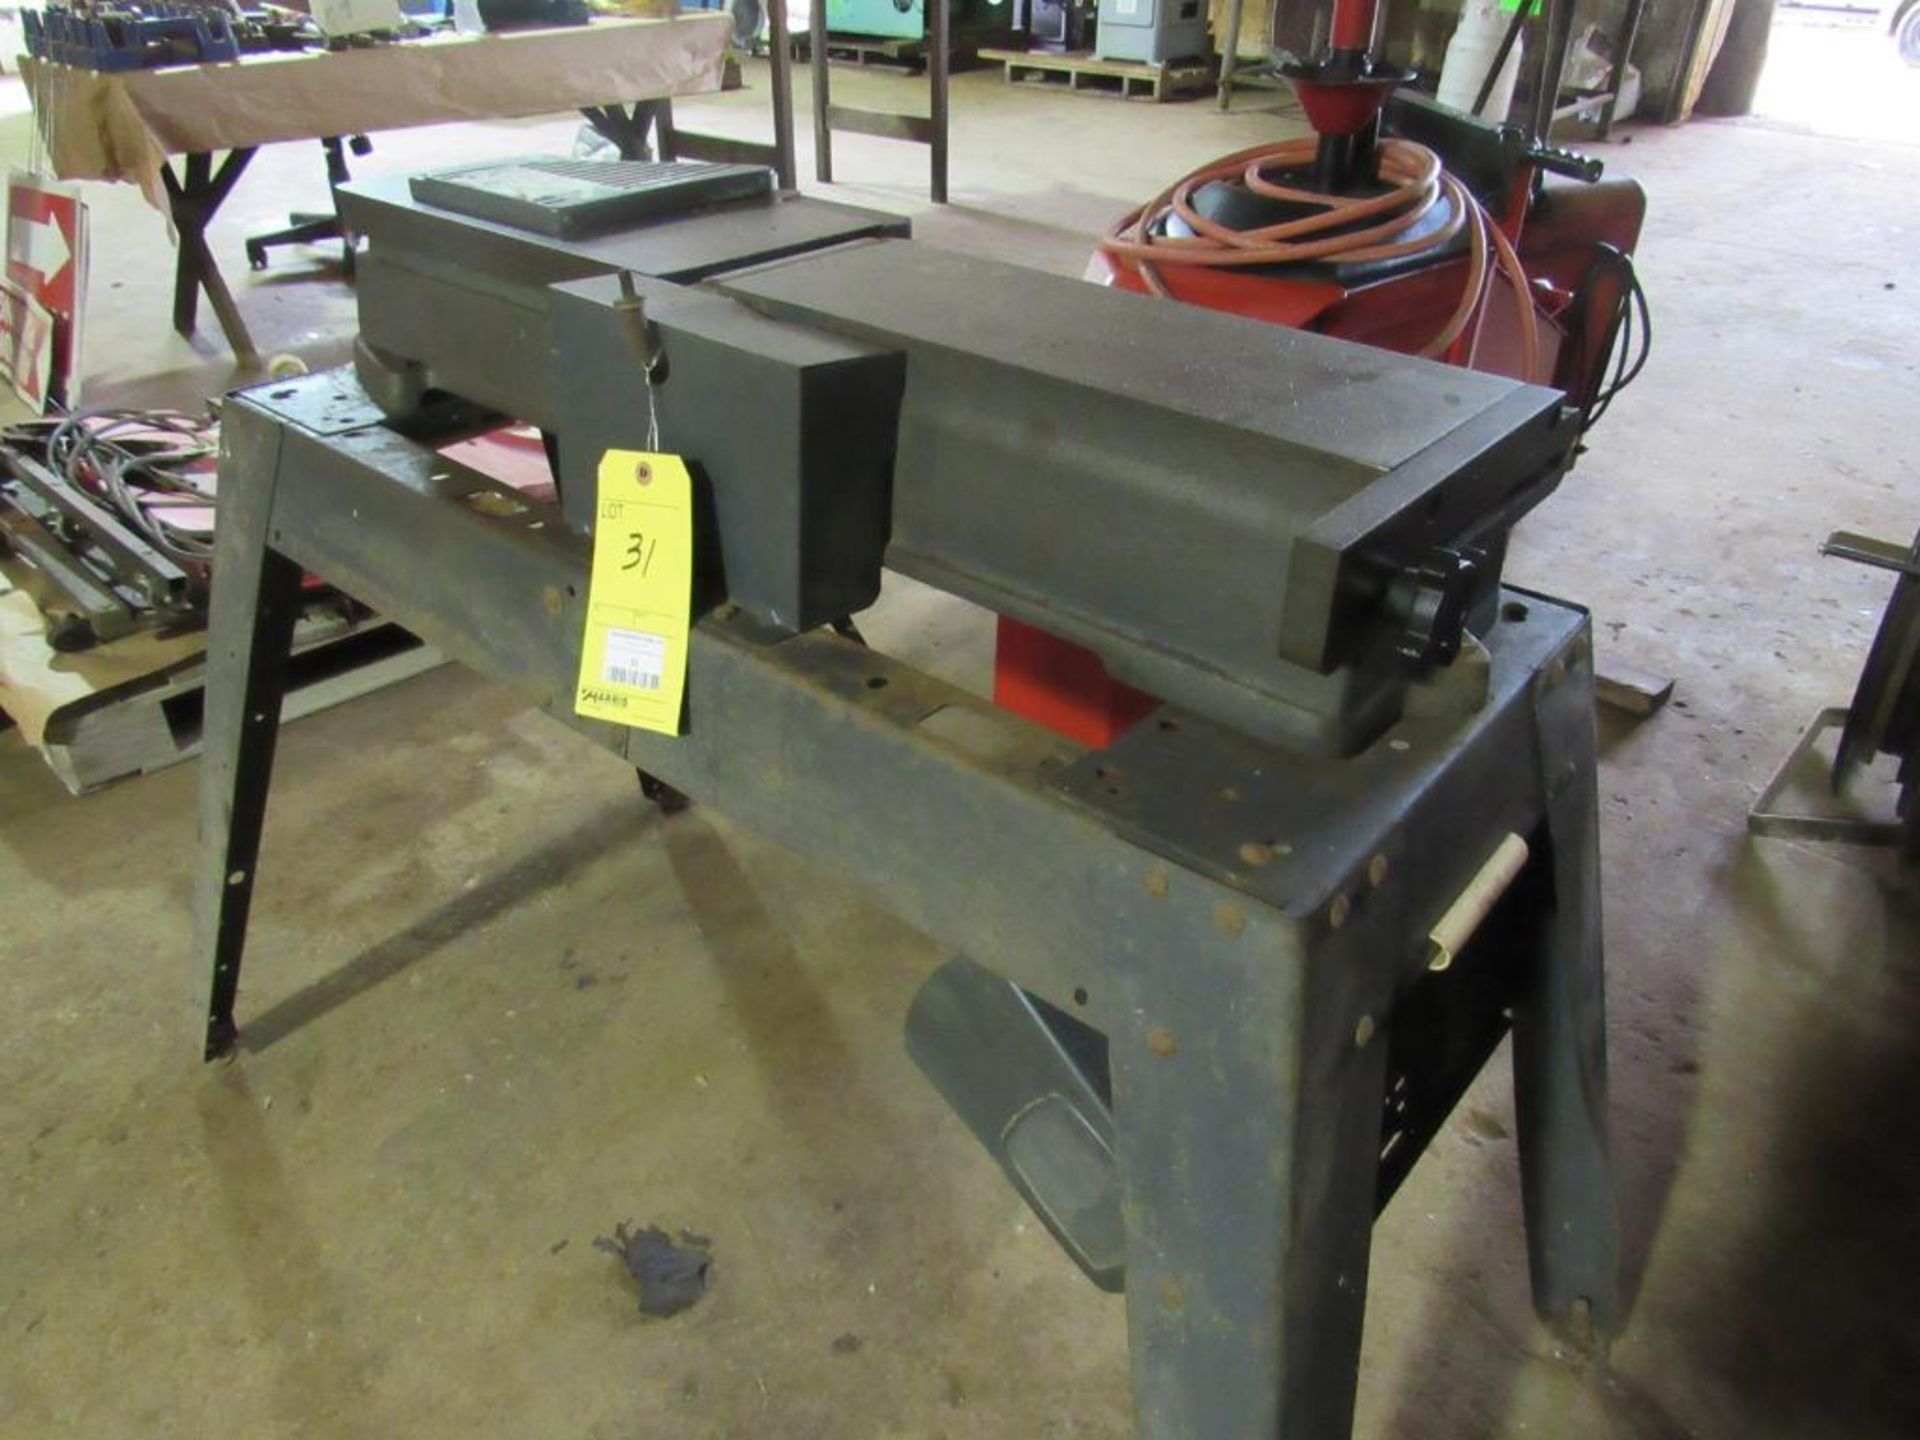 Sears Craftsman Model 113.206932 6-1/8" Jointer-Planer on A-Frame Stand - Image 3 of 7